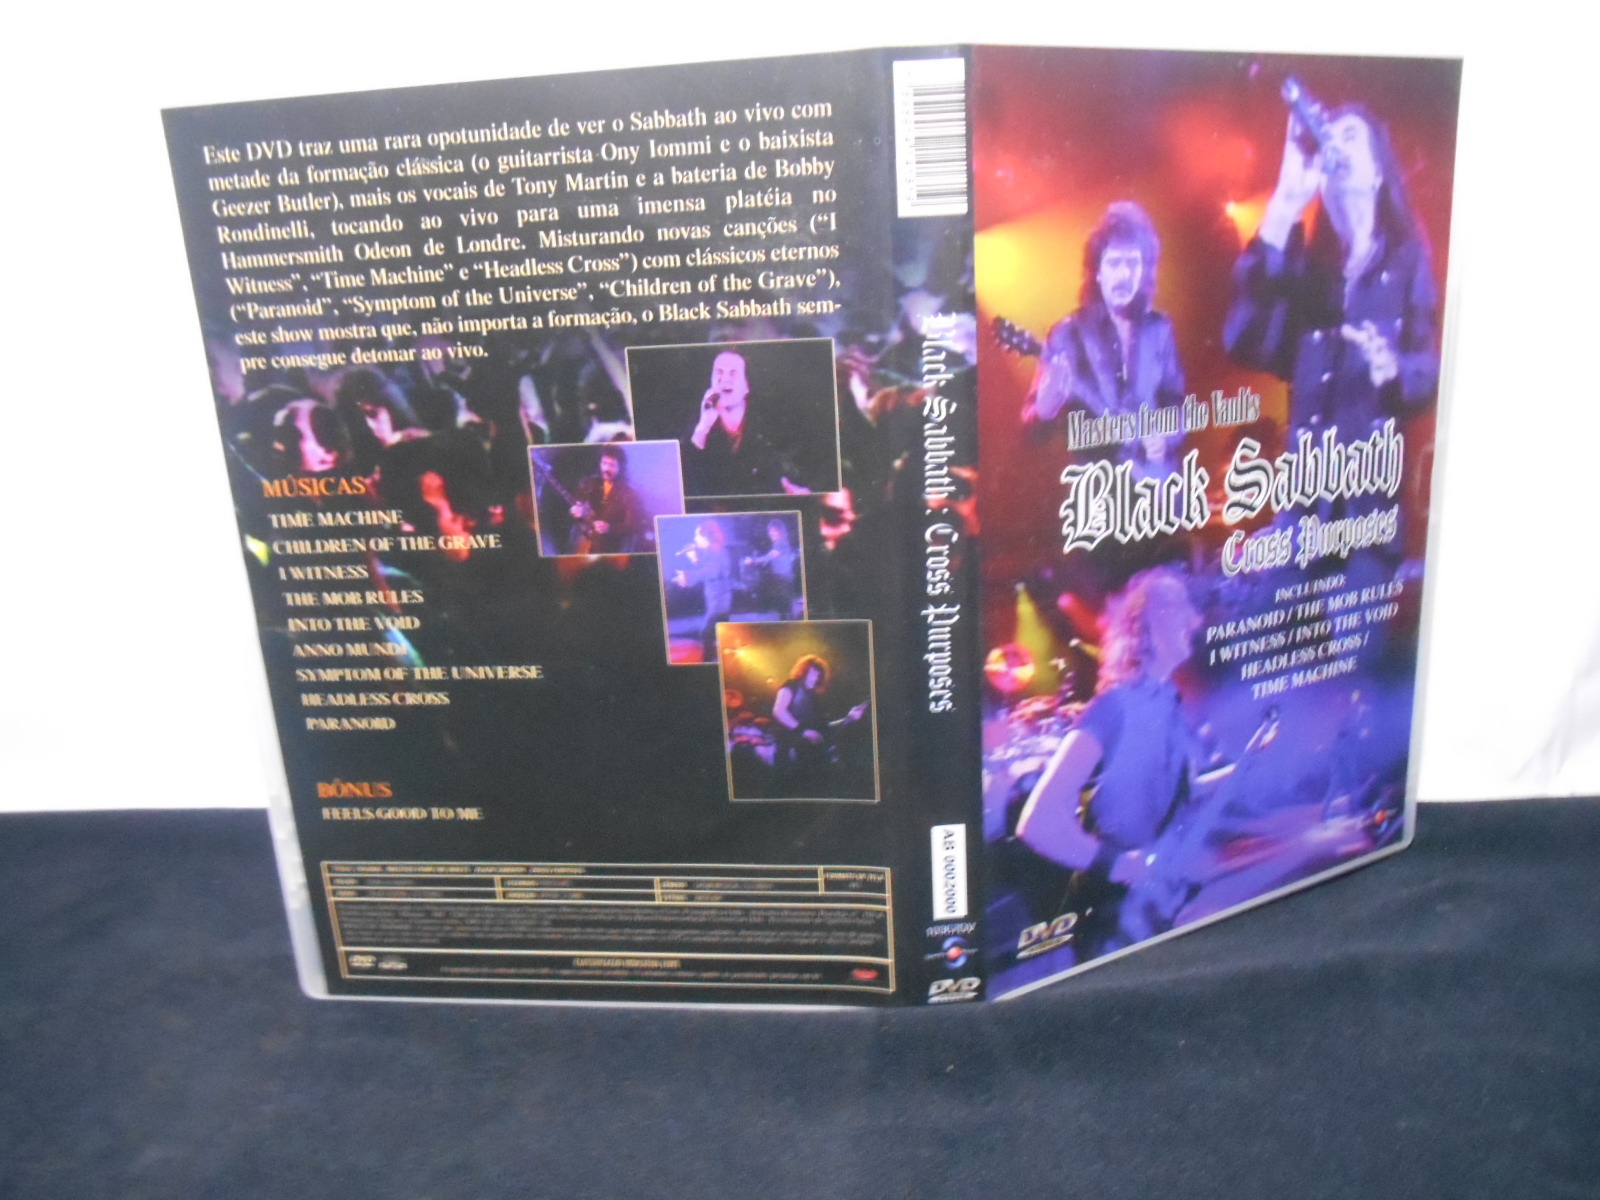 DVD - Black Sabbath - Cross Purposes Masters from the Vaults